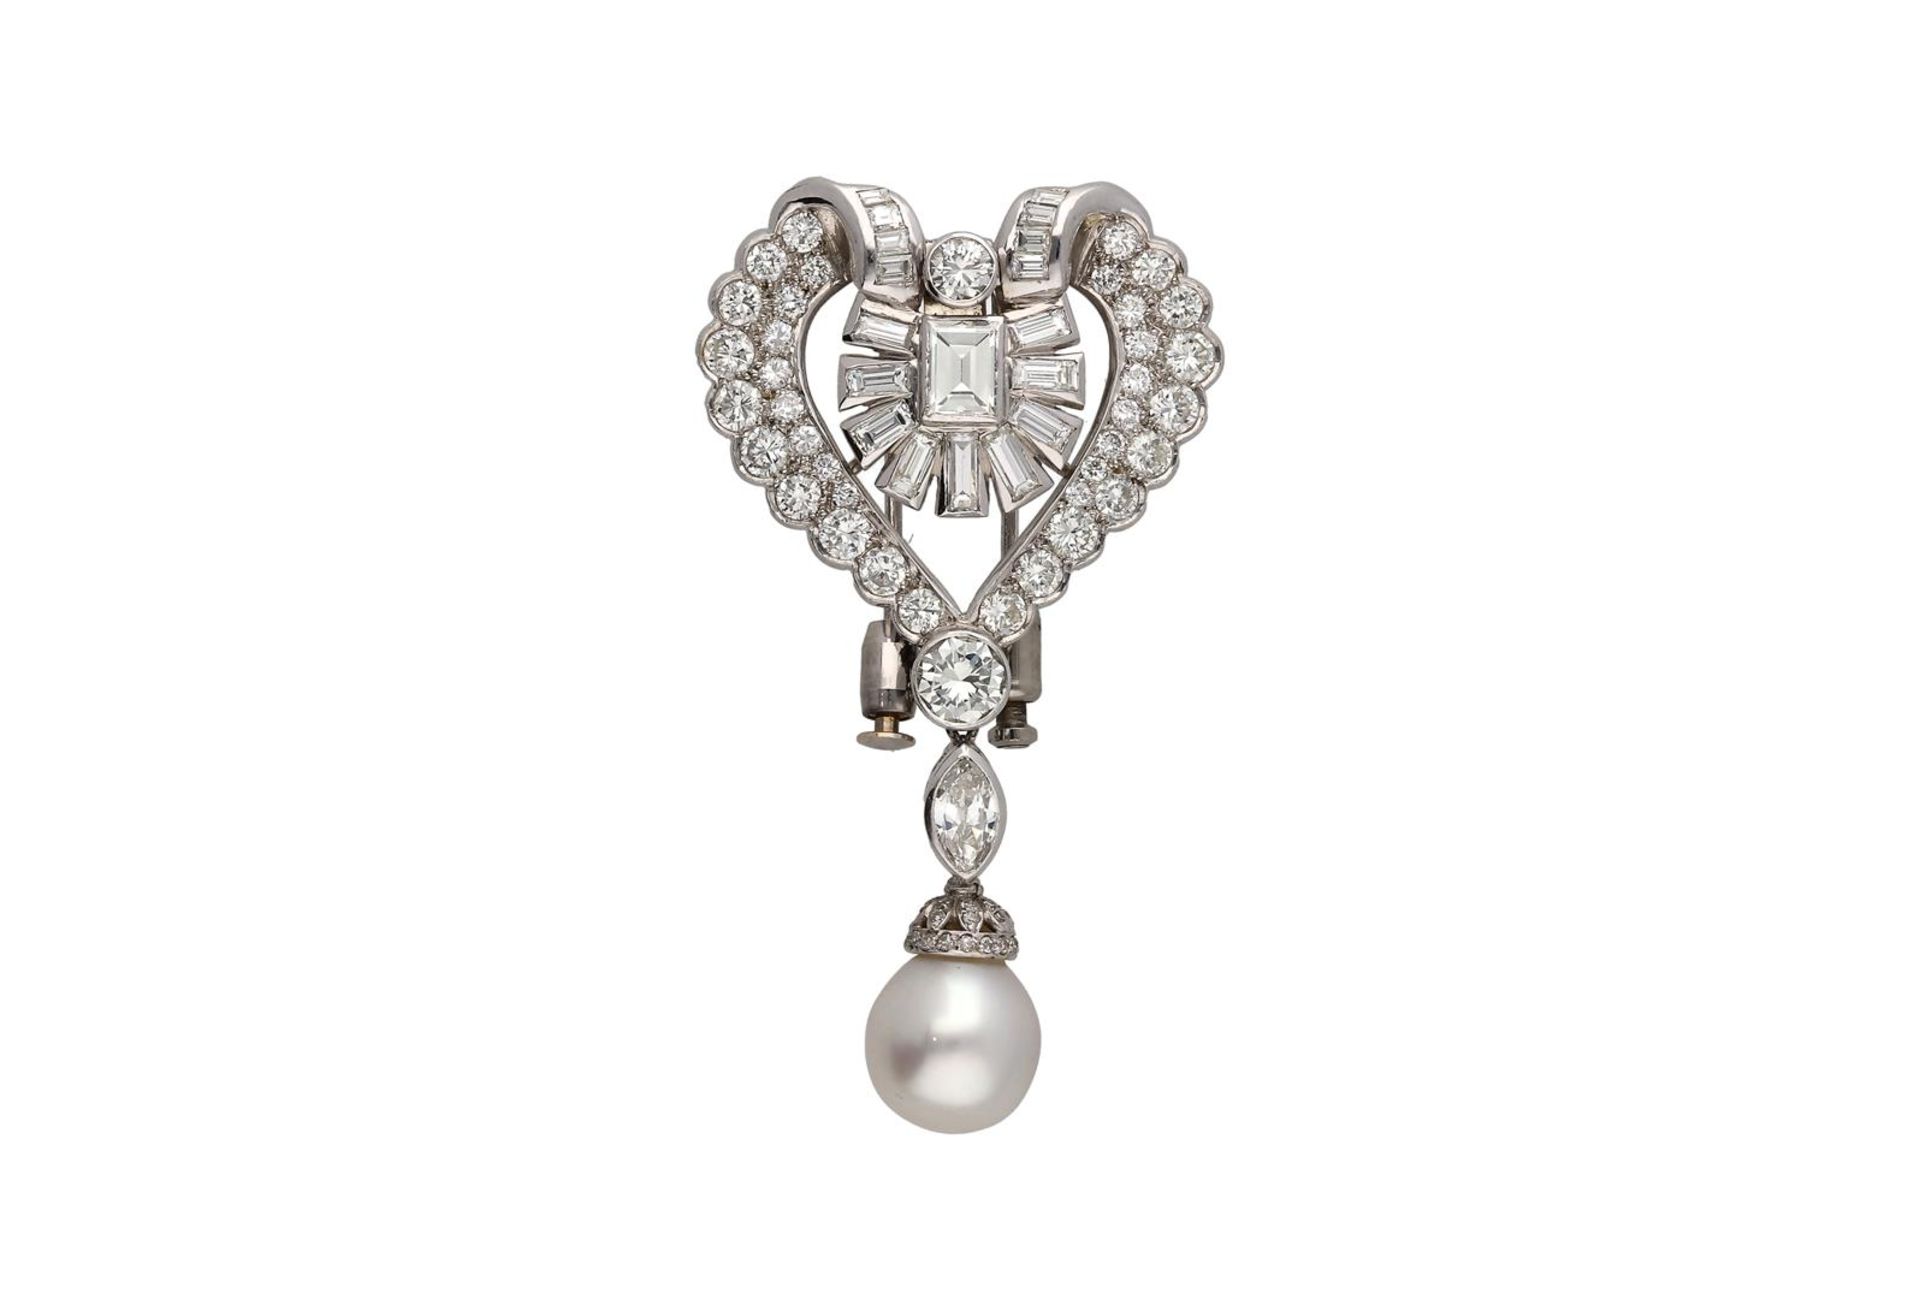 A platinum heart shaped brooch or pearl necklace clip, set with diamonds and a cultured pearl pendan - Image 2 of 2